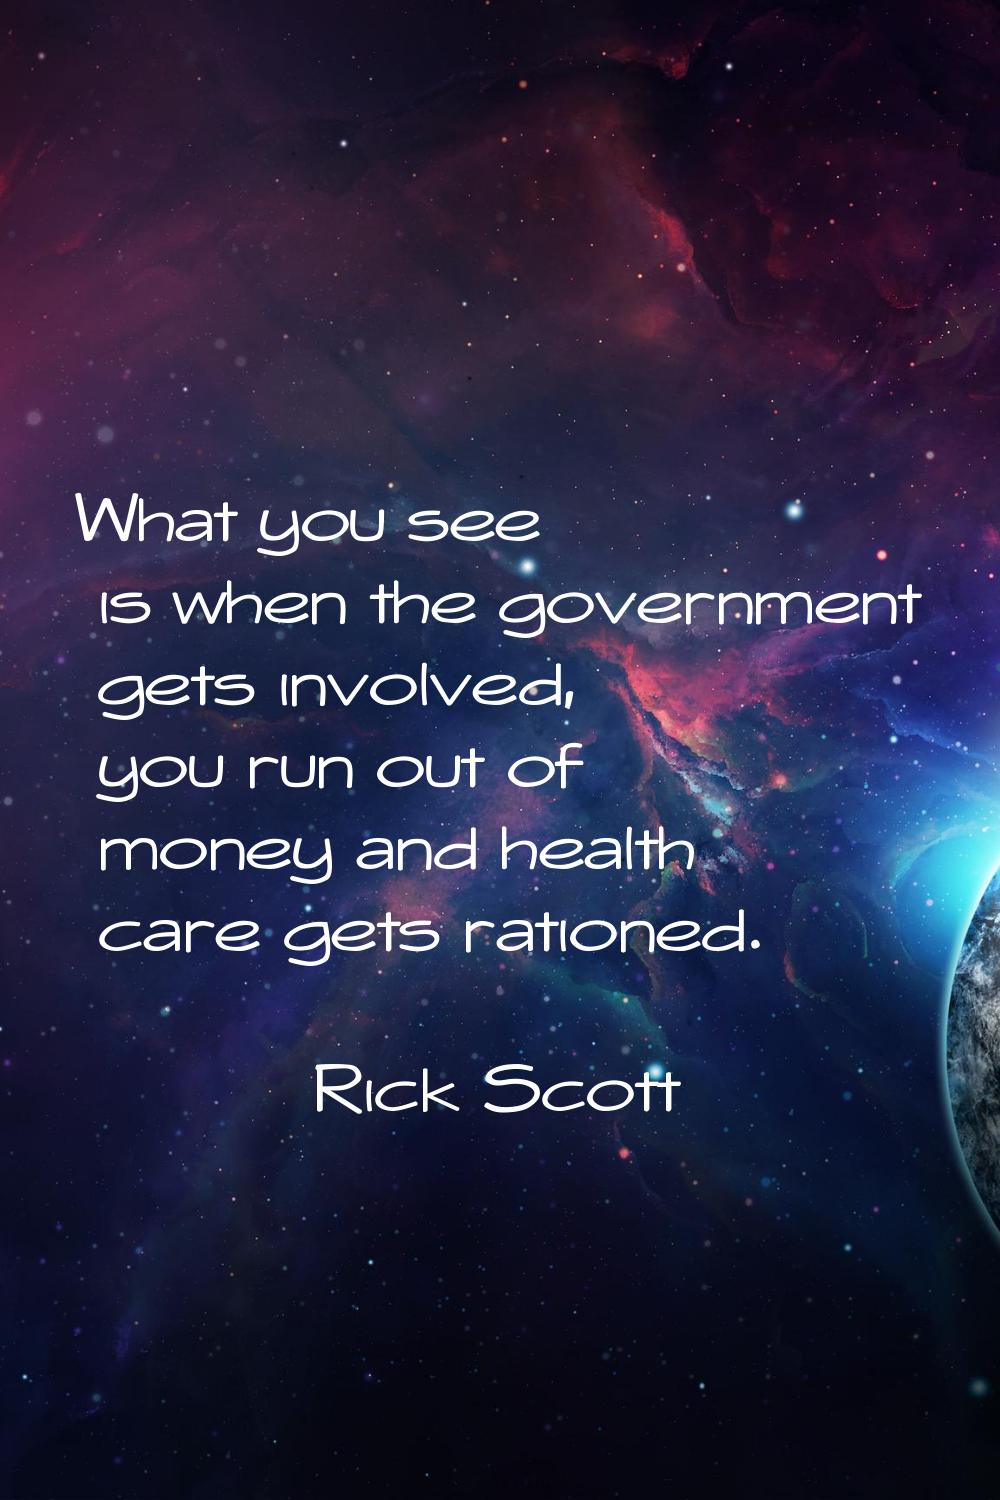 What you see is when the government gets involved, you run out of money and health care gets ration